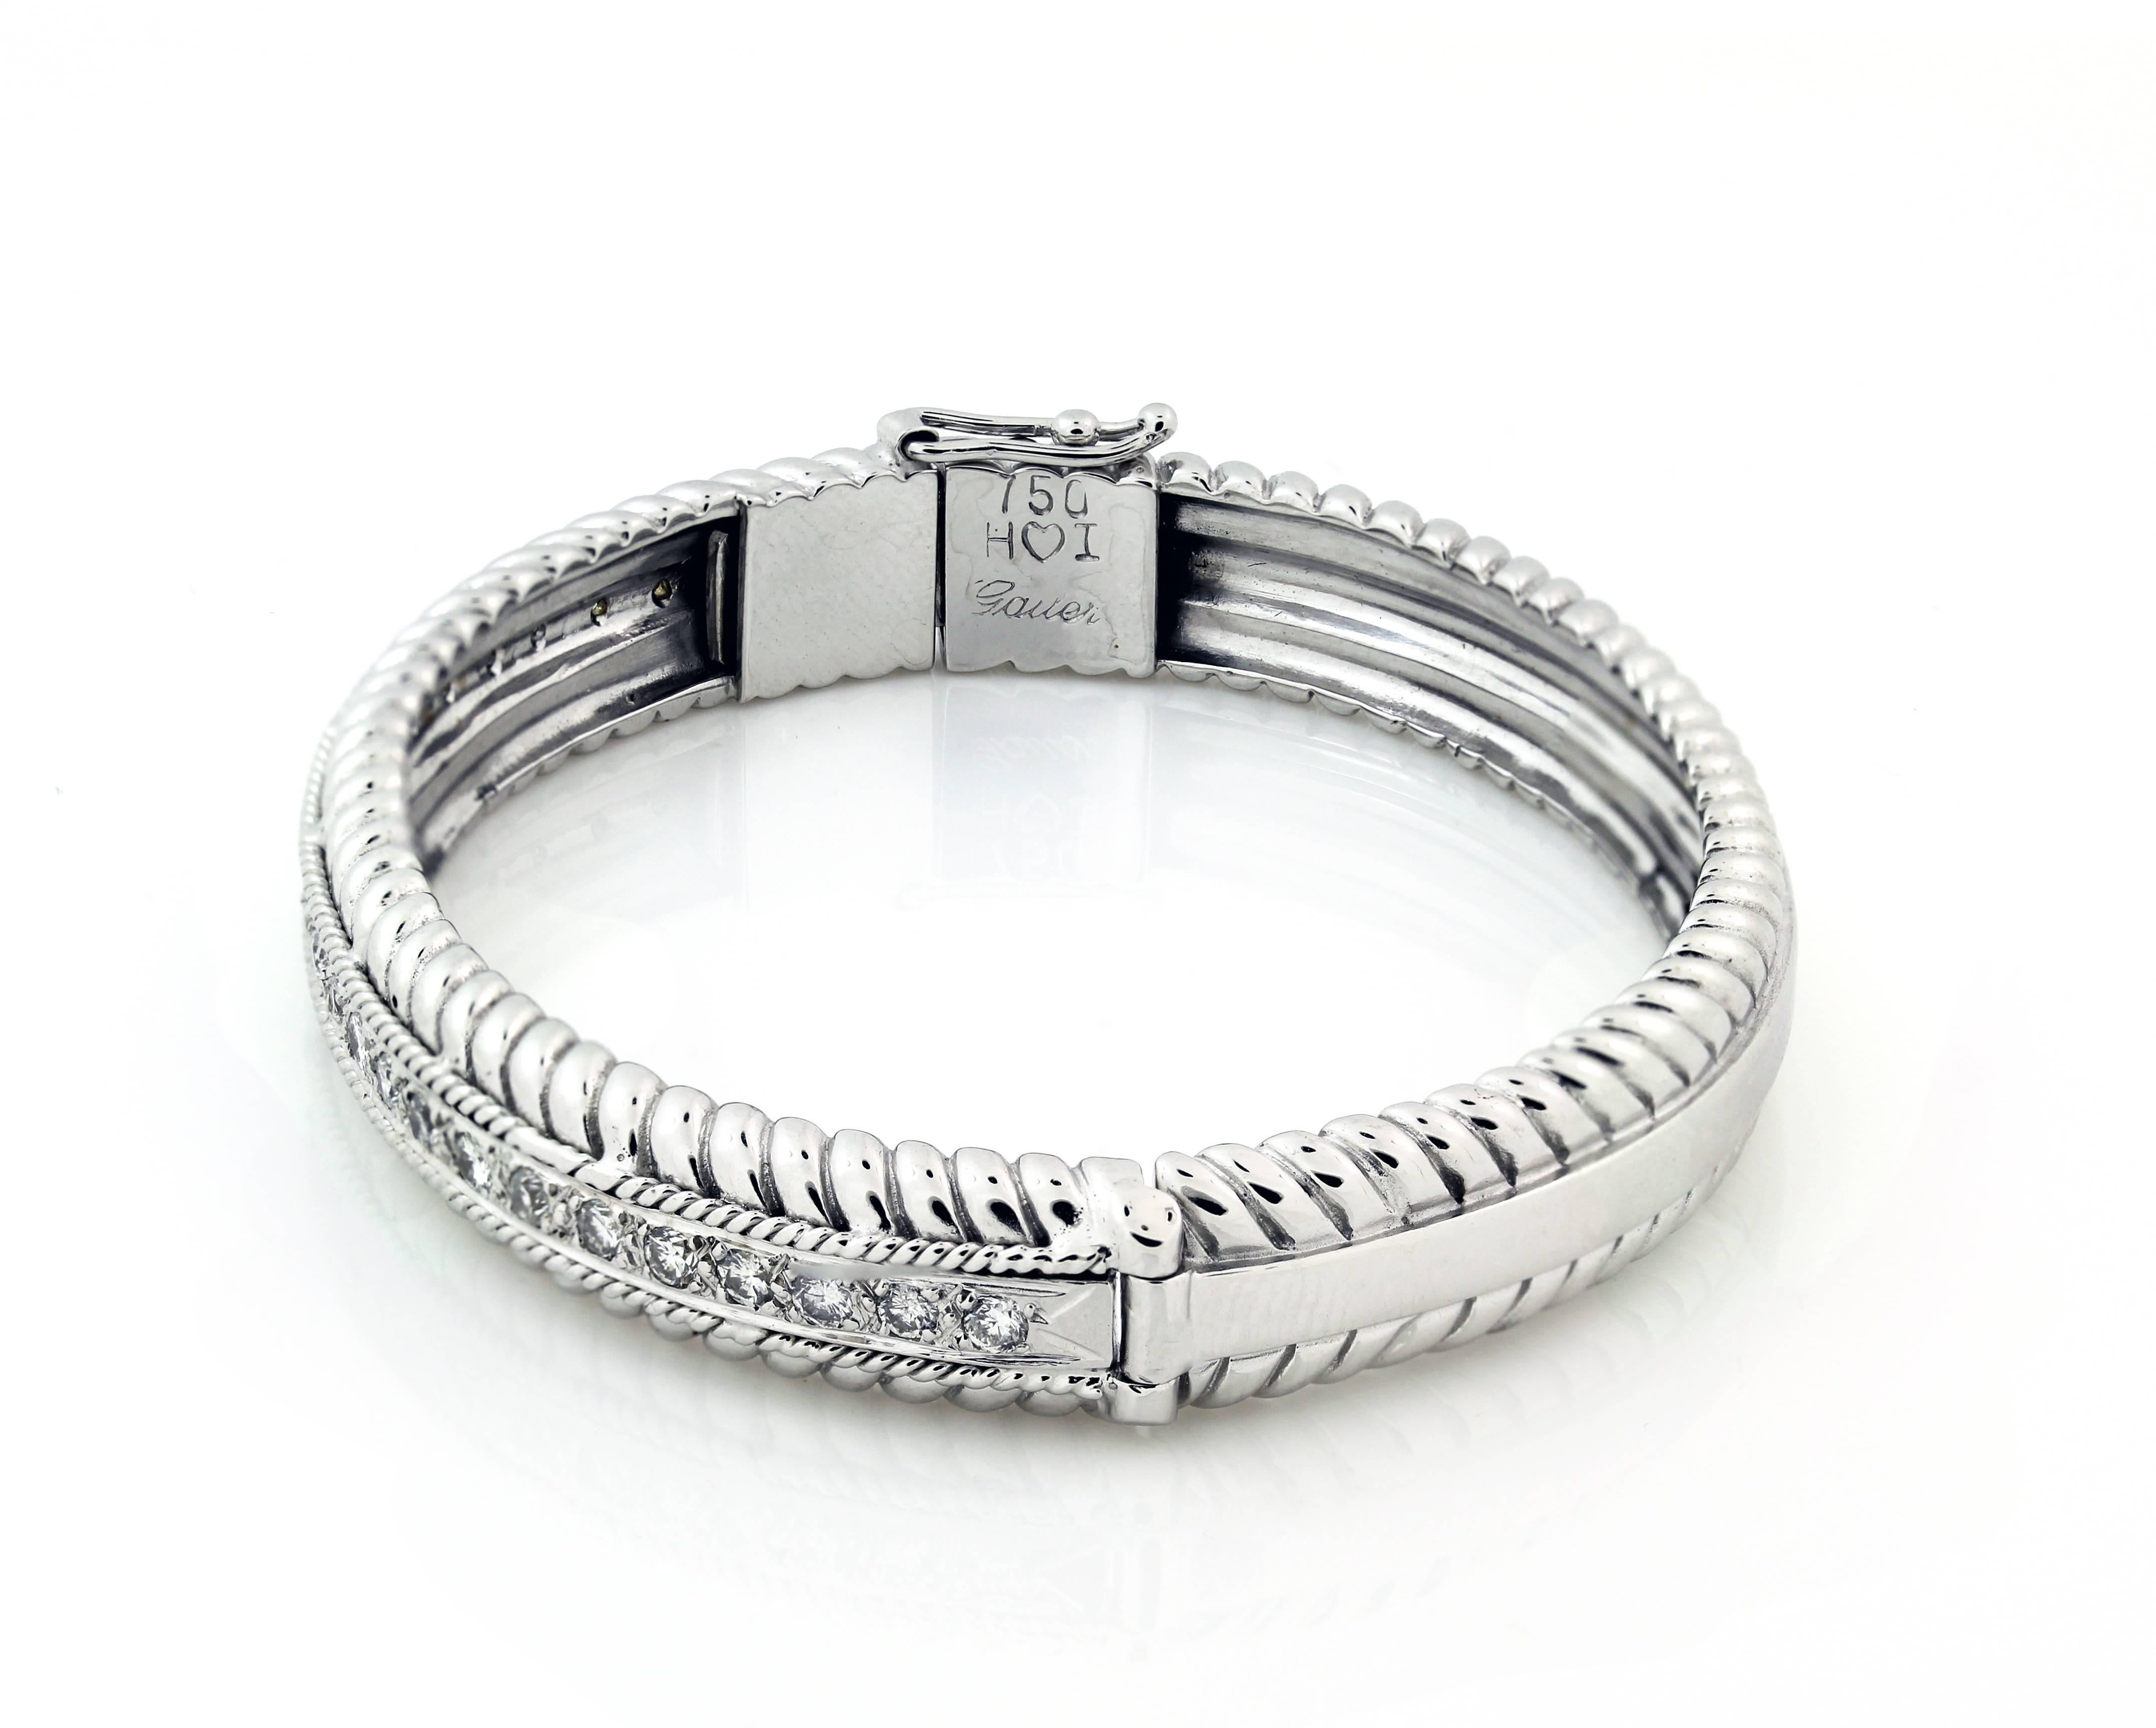 18K White Gold bangle bracelet with diamonds 

Diamonds are set on one side with gorgeous design work seen all throughout.

Apprx. 0.78 carat H color, SI1-SI2 clarity diamonds 

Bangle is a size 7 and 0.3 inch width.

Push button, hinge used to lock